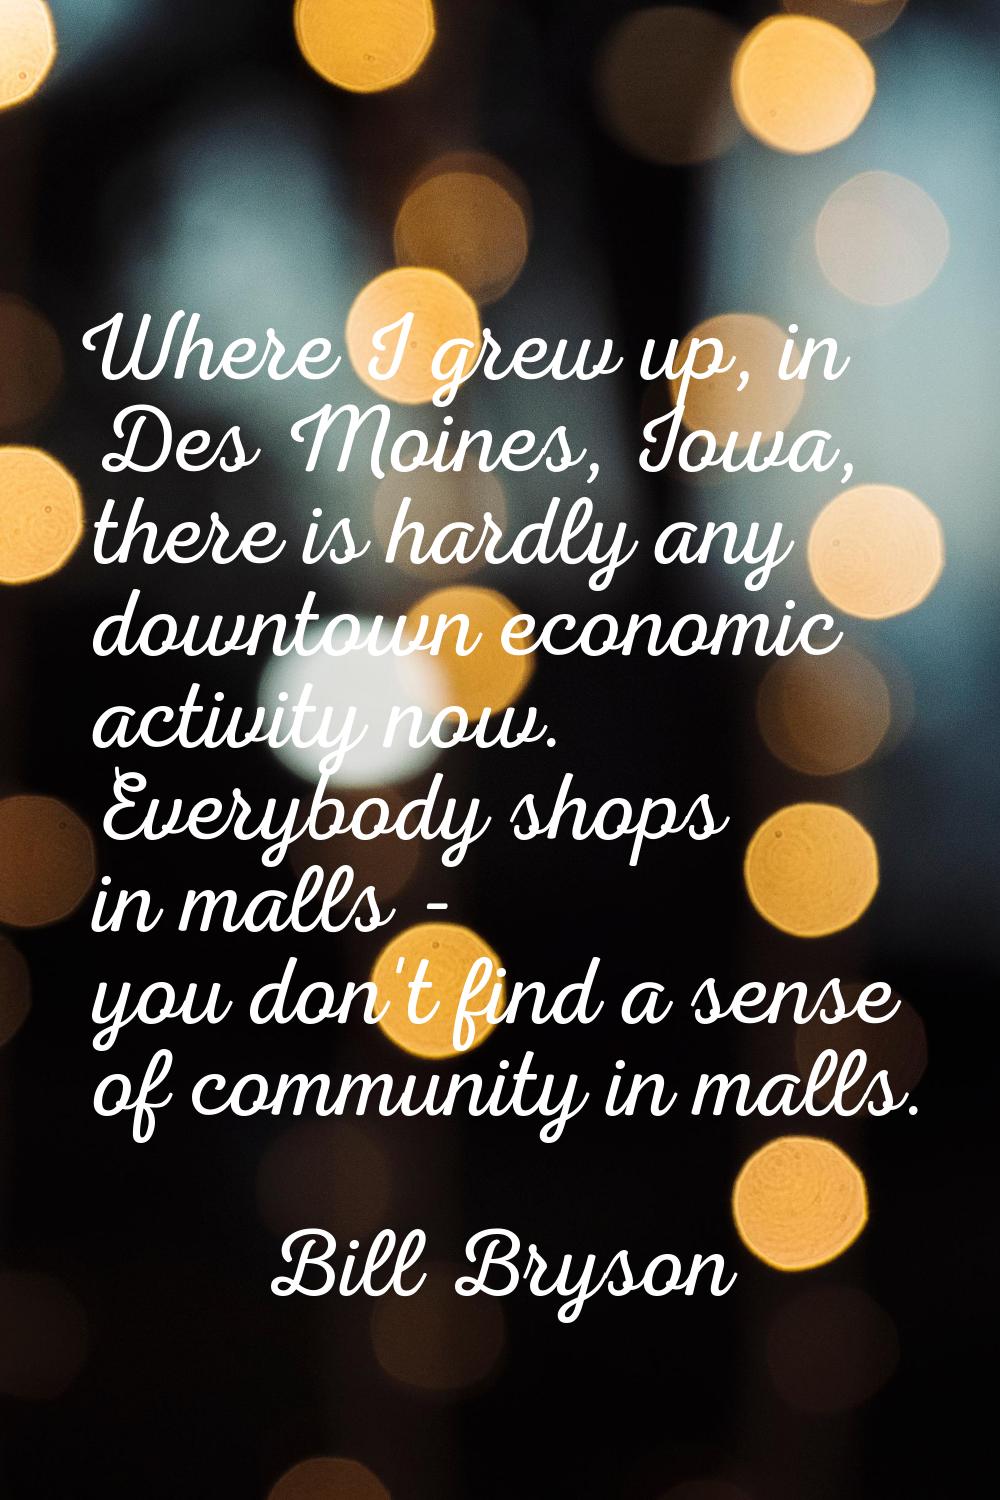 Where I grew up, in Des Moines, Iowa, there is hardly any downtown economic activity now. Everybody